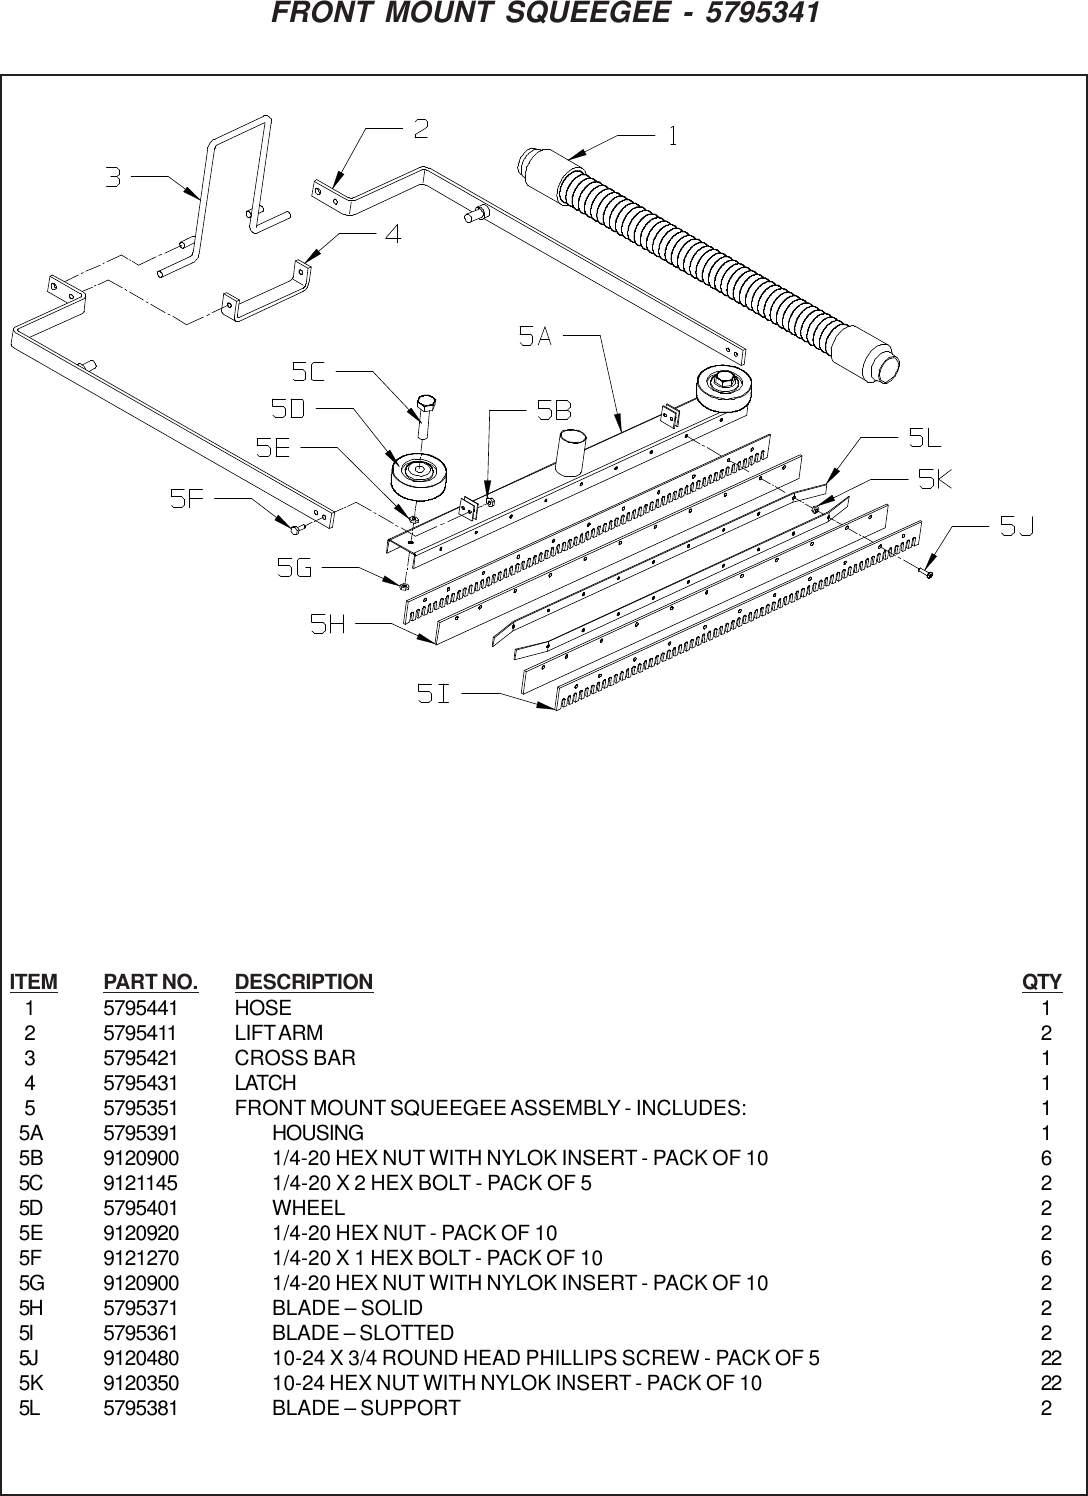 Page 6 of 8 - 9095715 Designer 16 Illustrated Parts Book Orig-1_10-07_pcn_11701.pmd  Nss-designer-16-wet-dry-vac-parts-manual